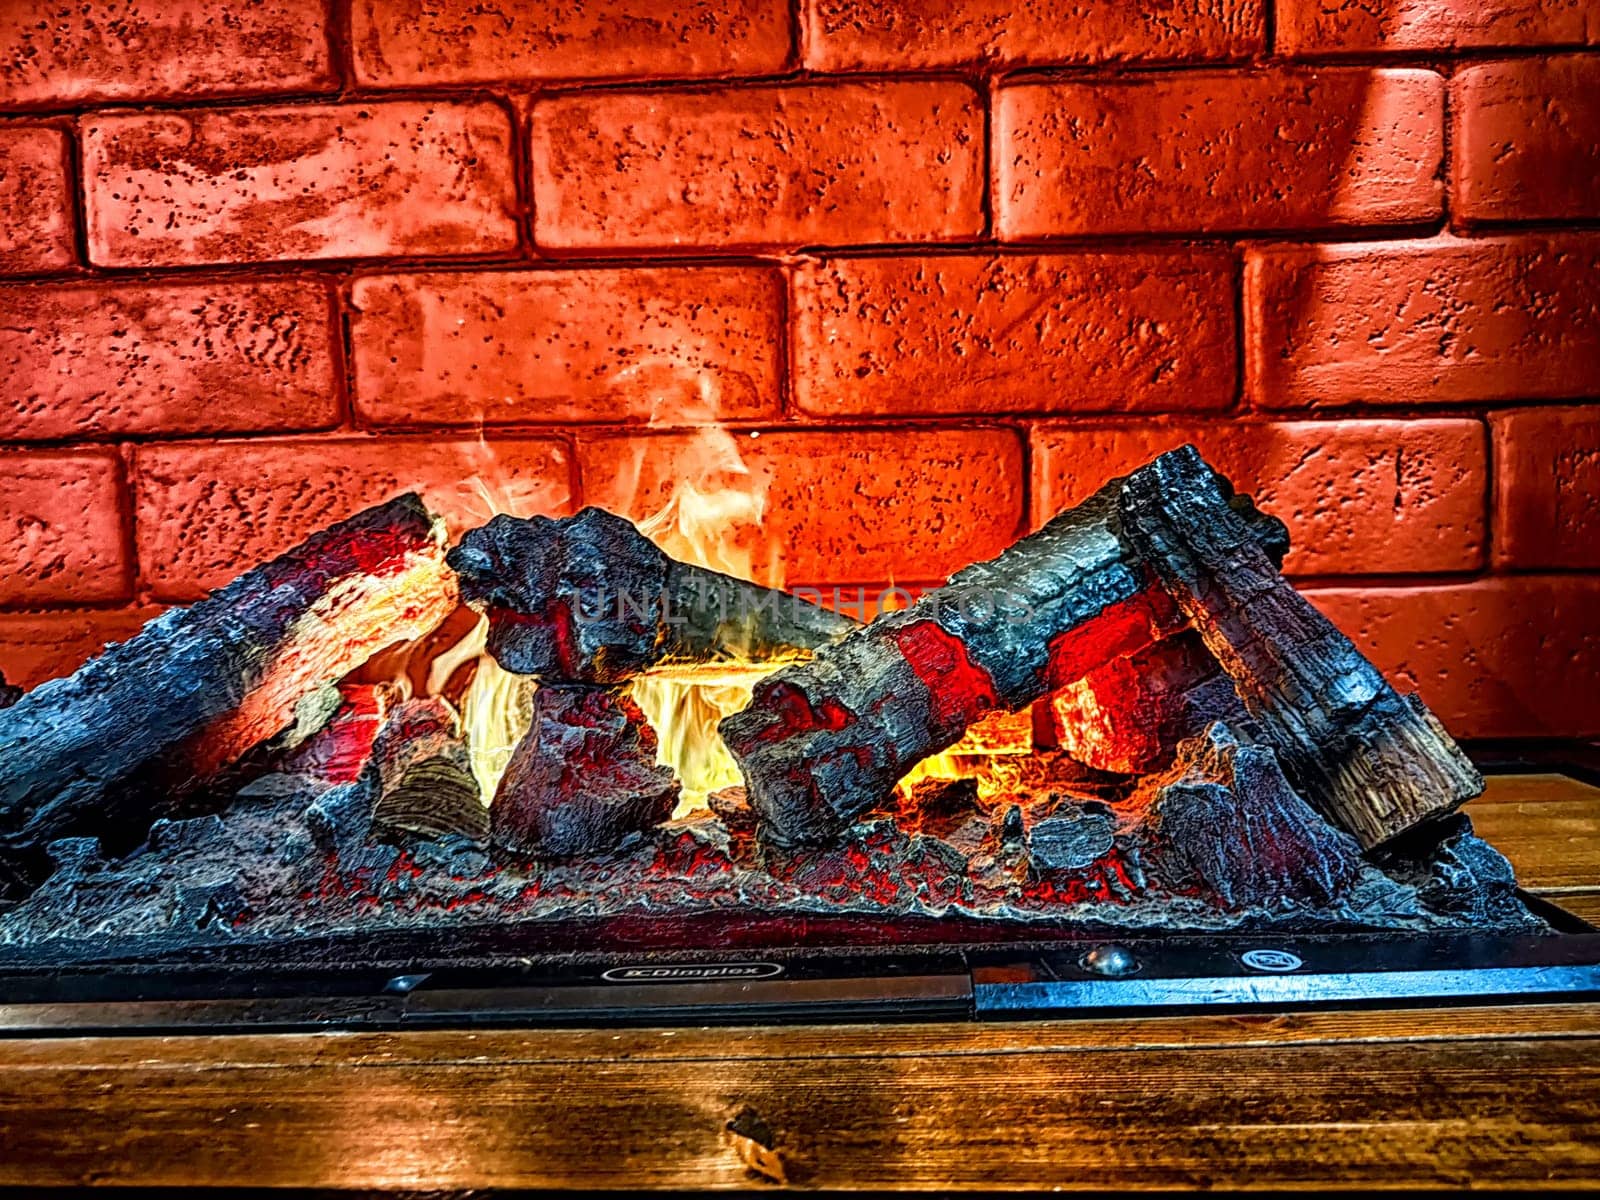 Fireplace. Firebrands, fire and a brick wall on the background. Firebrands ablaze with a cozy flame against a brick backdrop